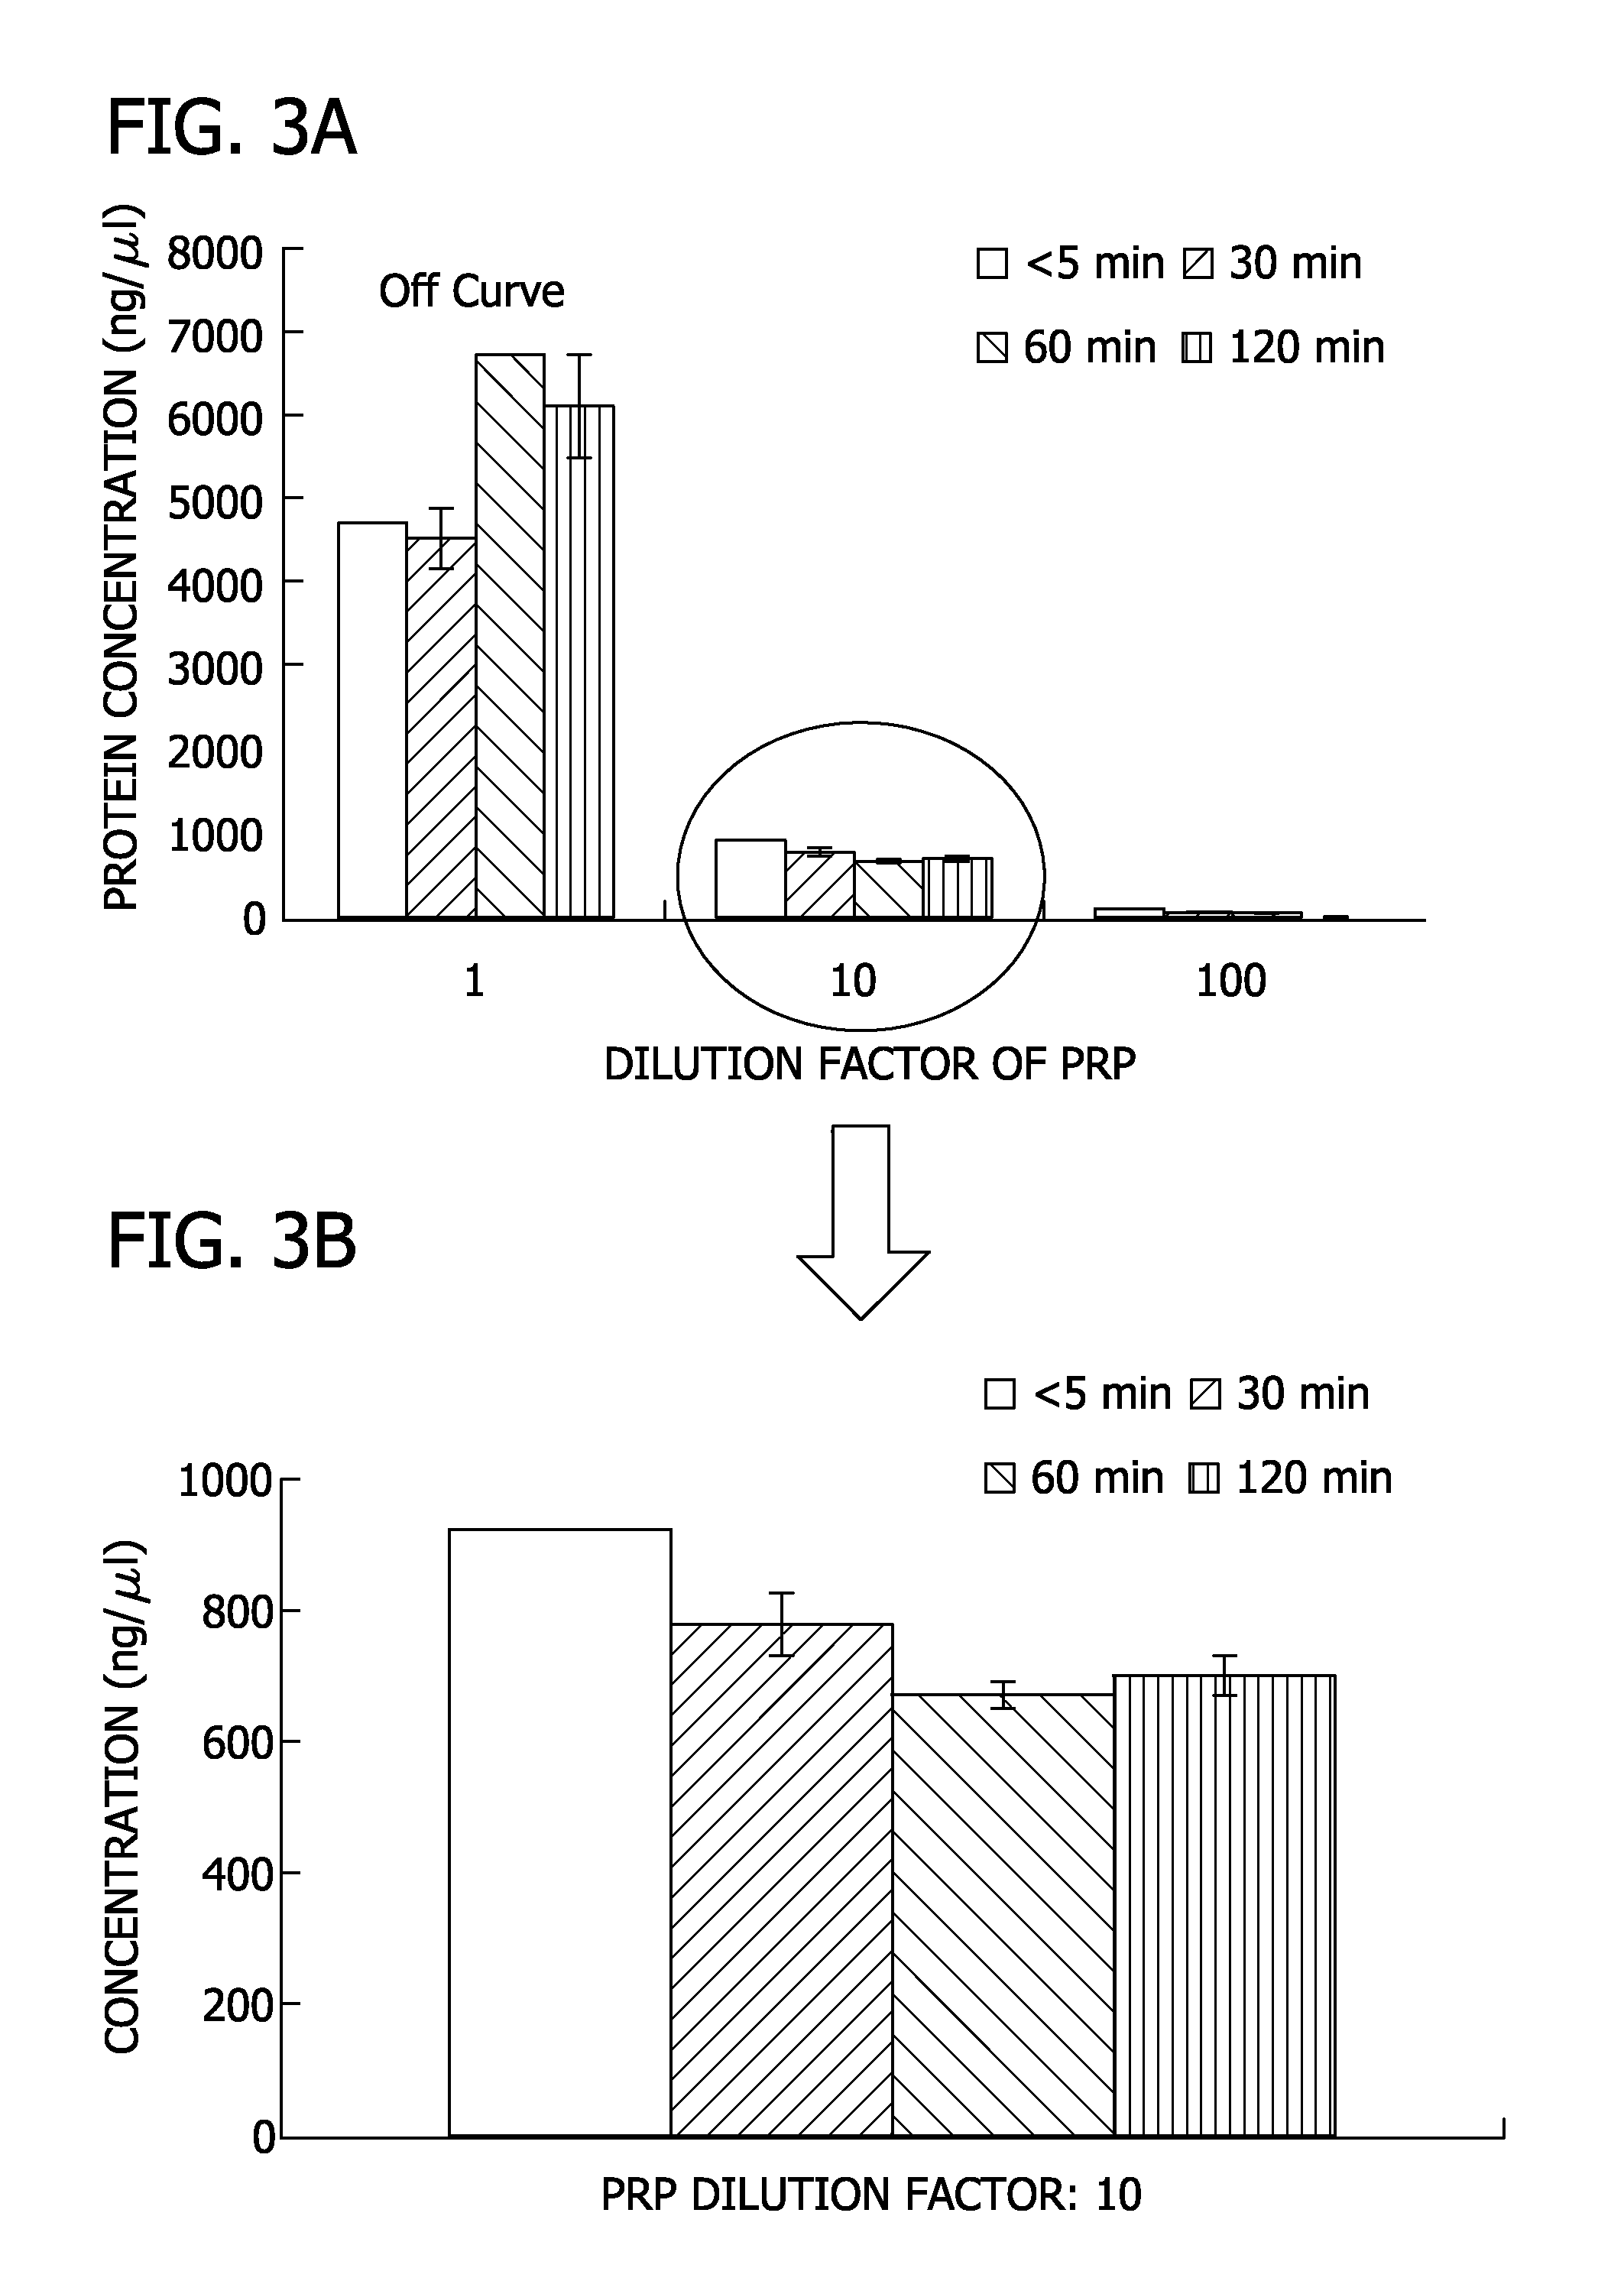 Selection of platelet rich plasma components via mineral binding